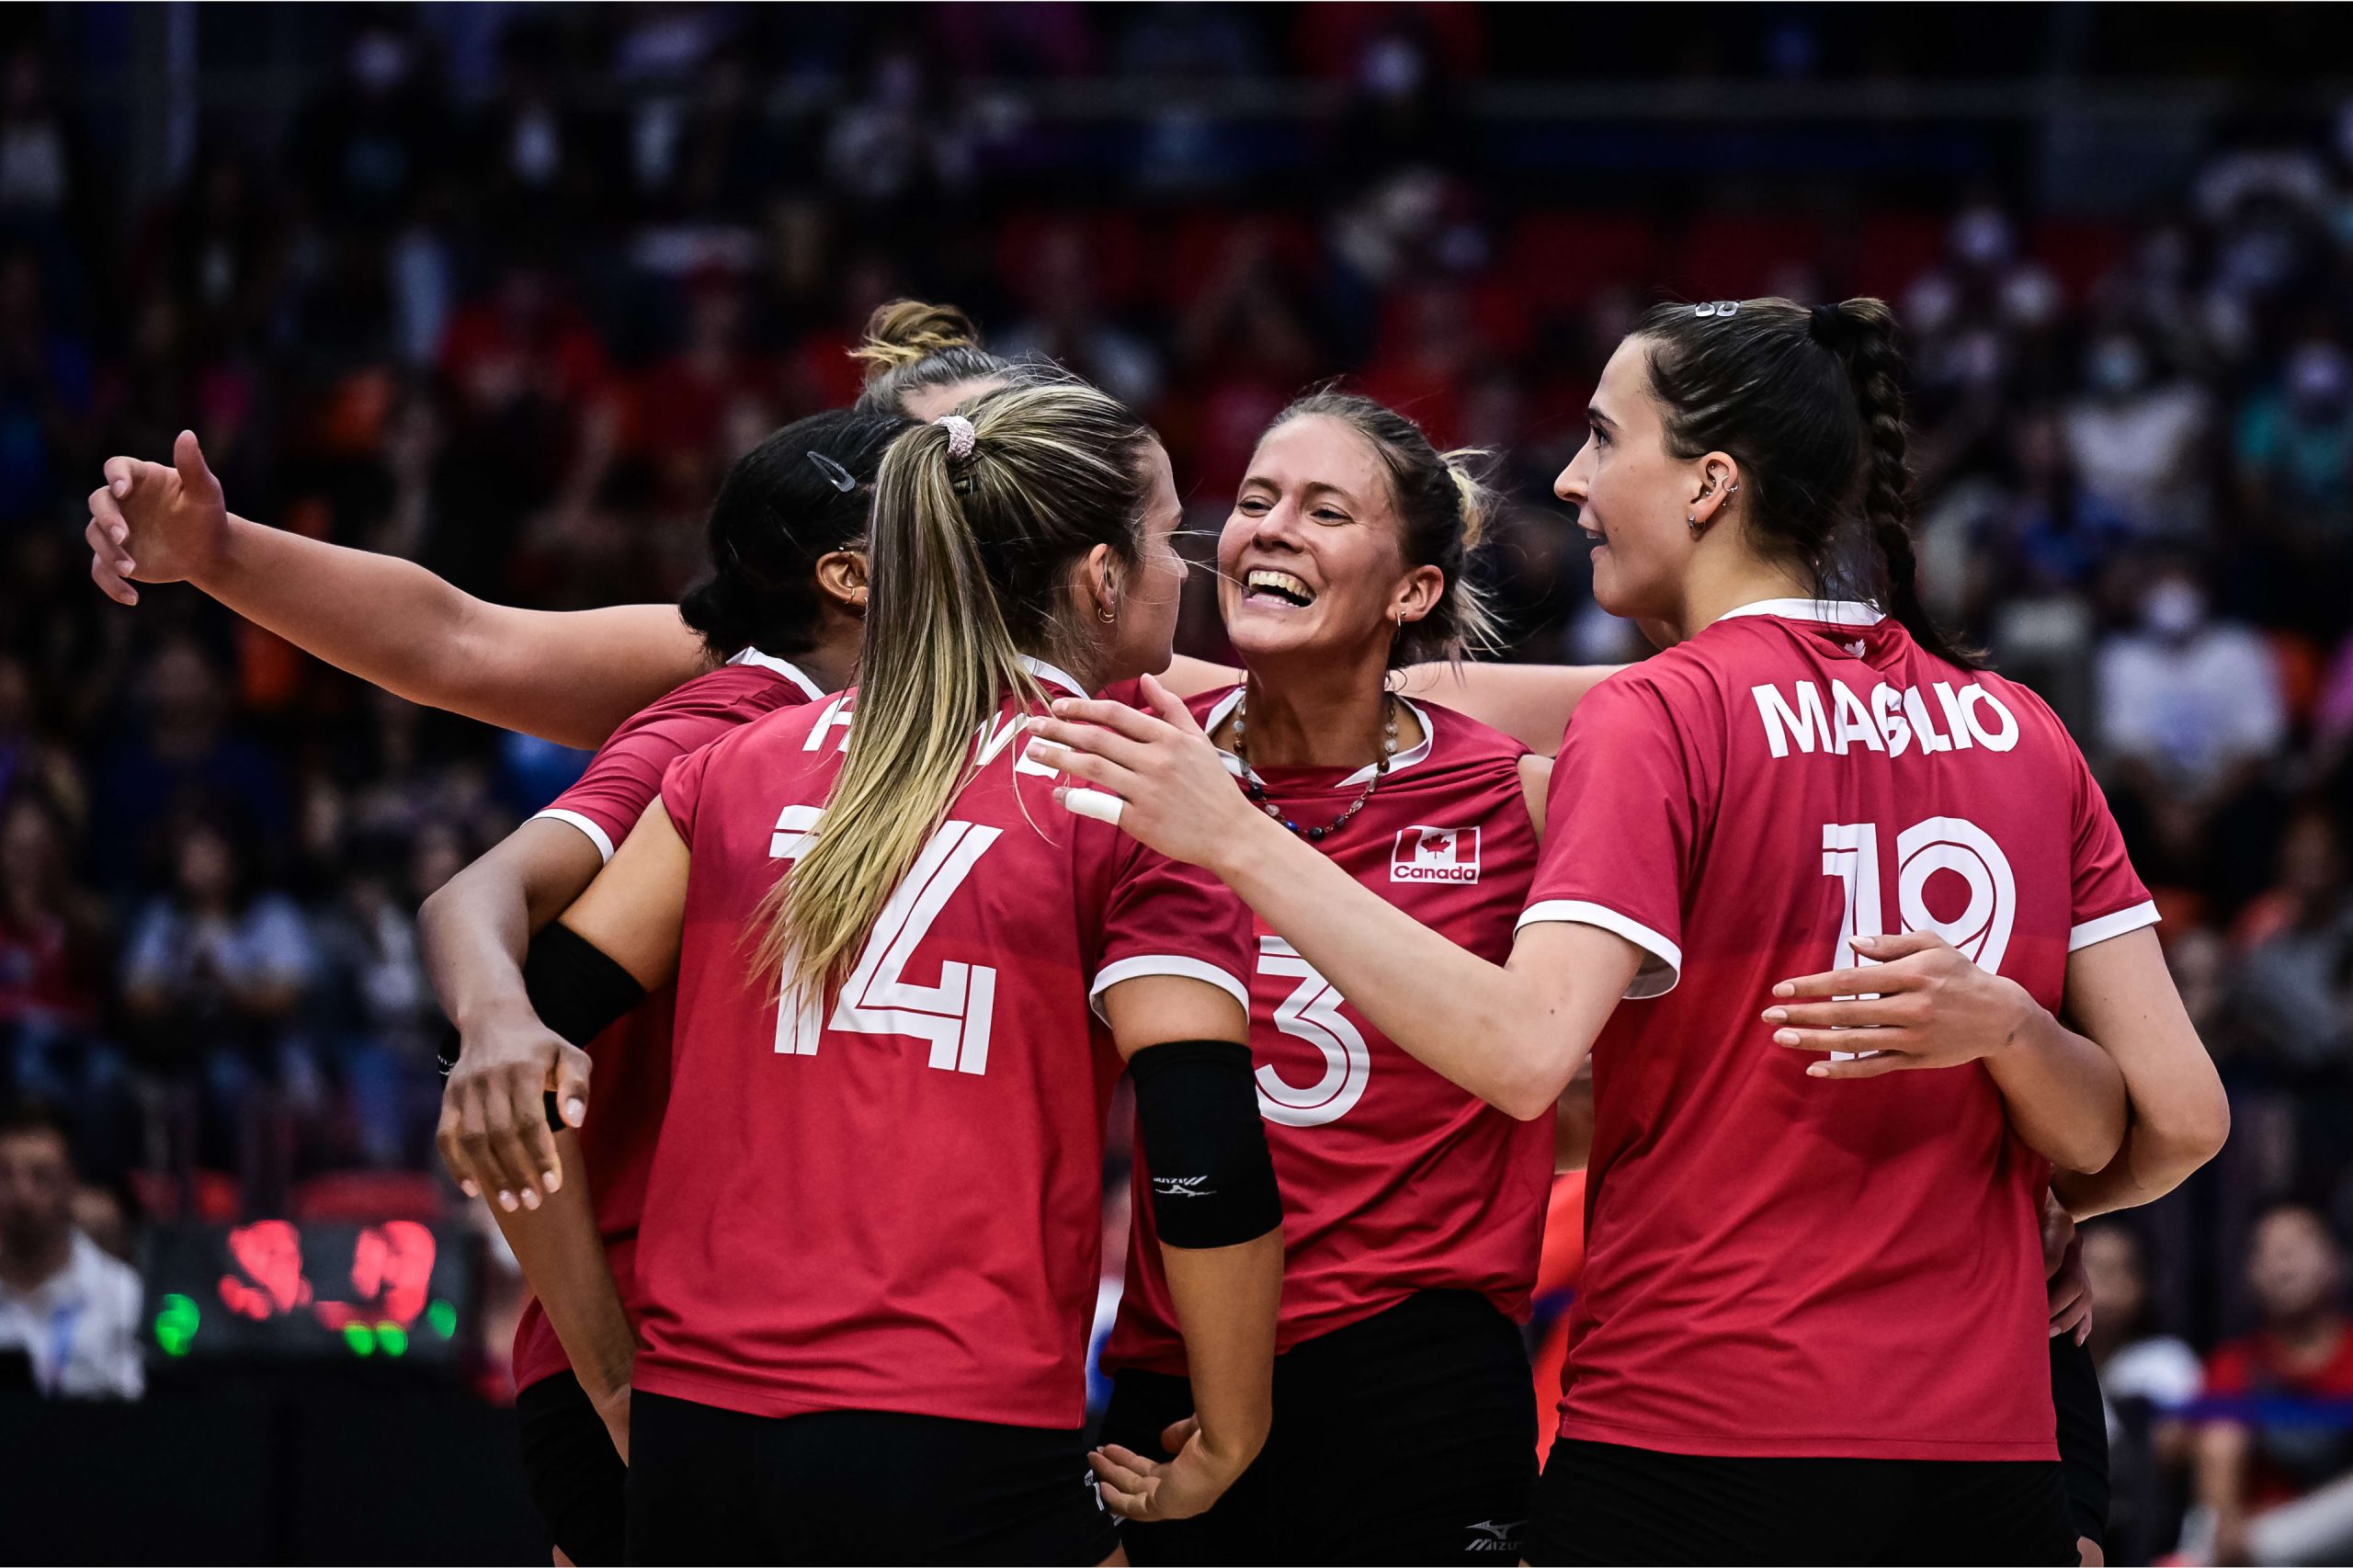 Canada blanks Croatia and Dominicans fall to Germany to open Women’s VNL week 3